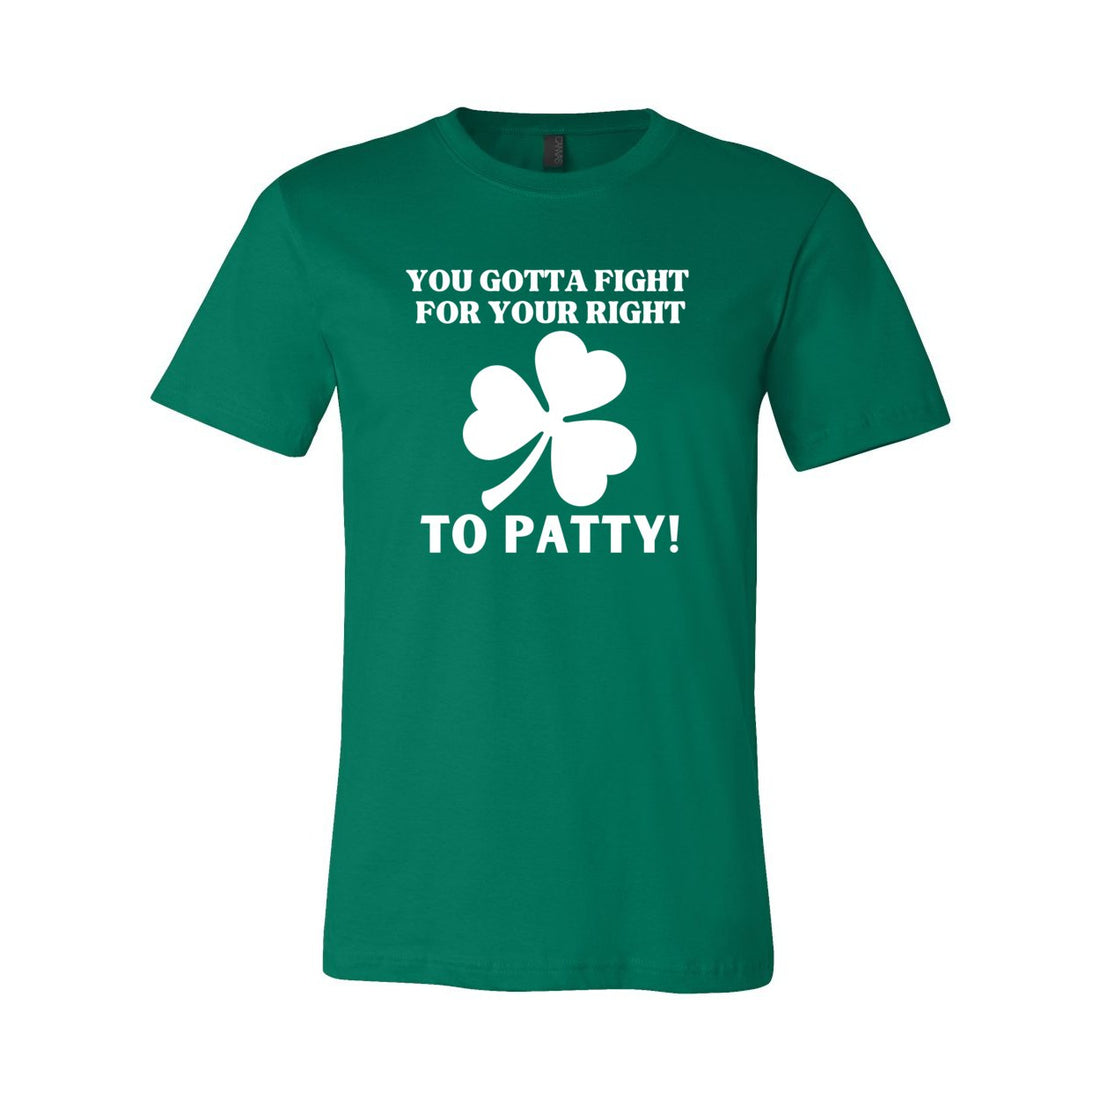 Right To Patty Short Sleeve Jersey Tee - T-Shirts - Positively Sassy - Right To Patty Short Sleeve Jersey Tee